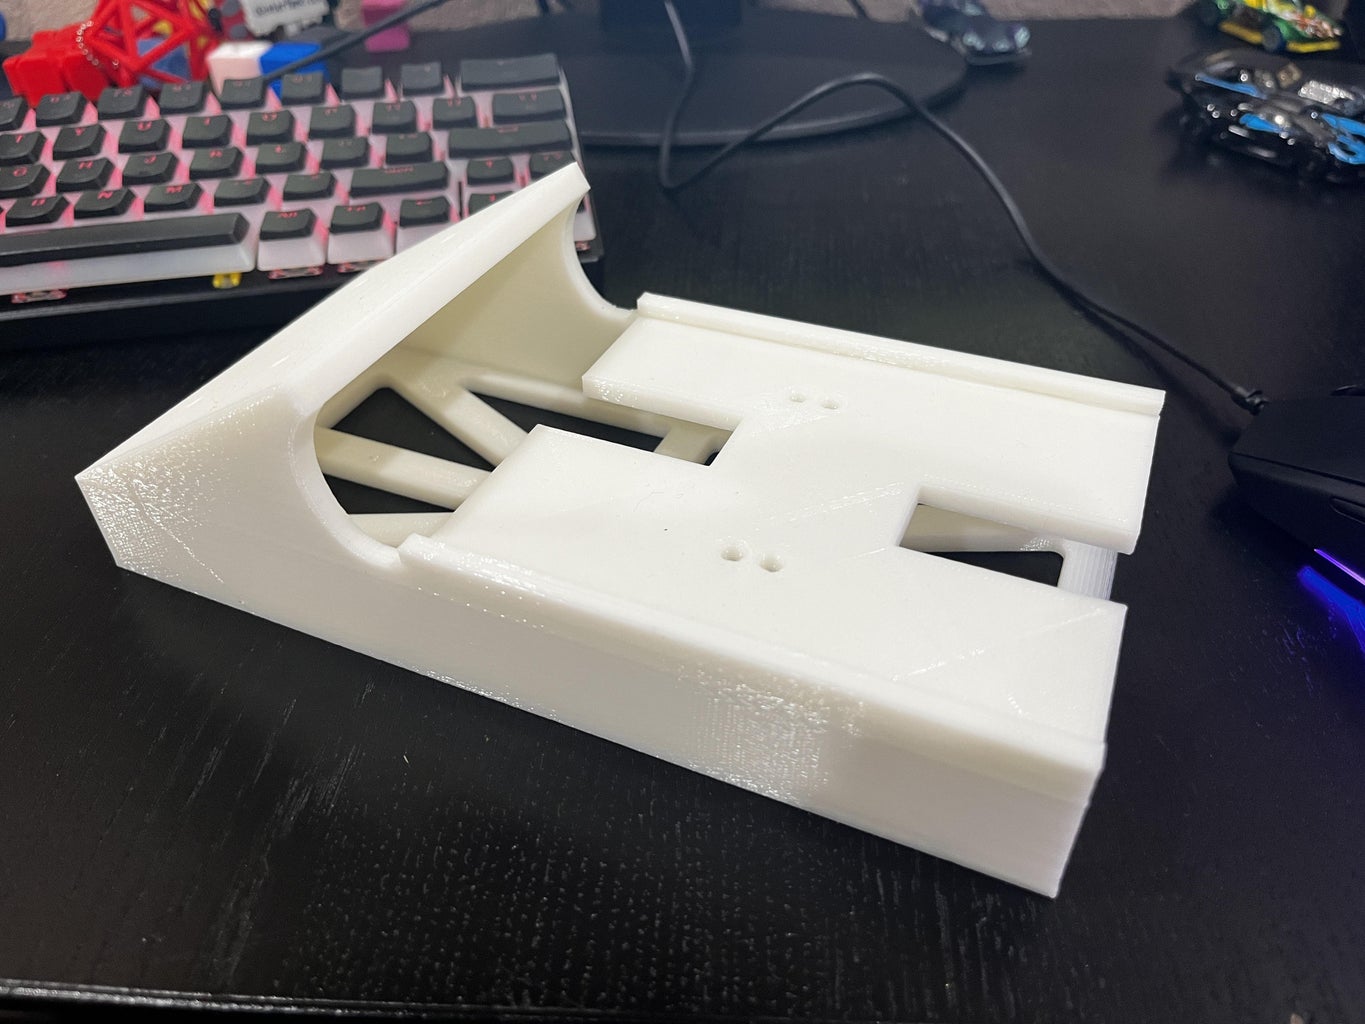 3D Printing the Parts